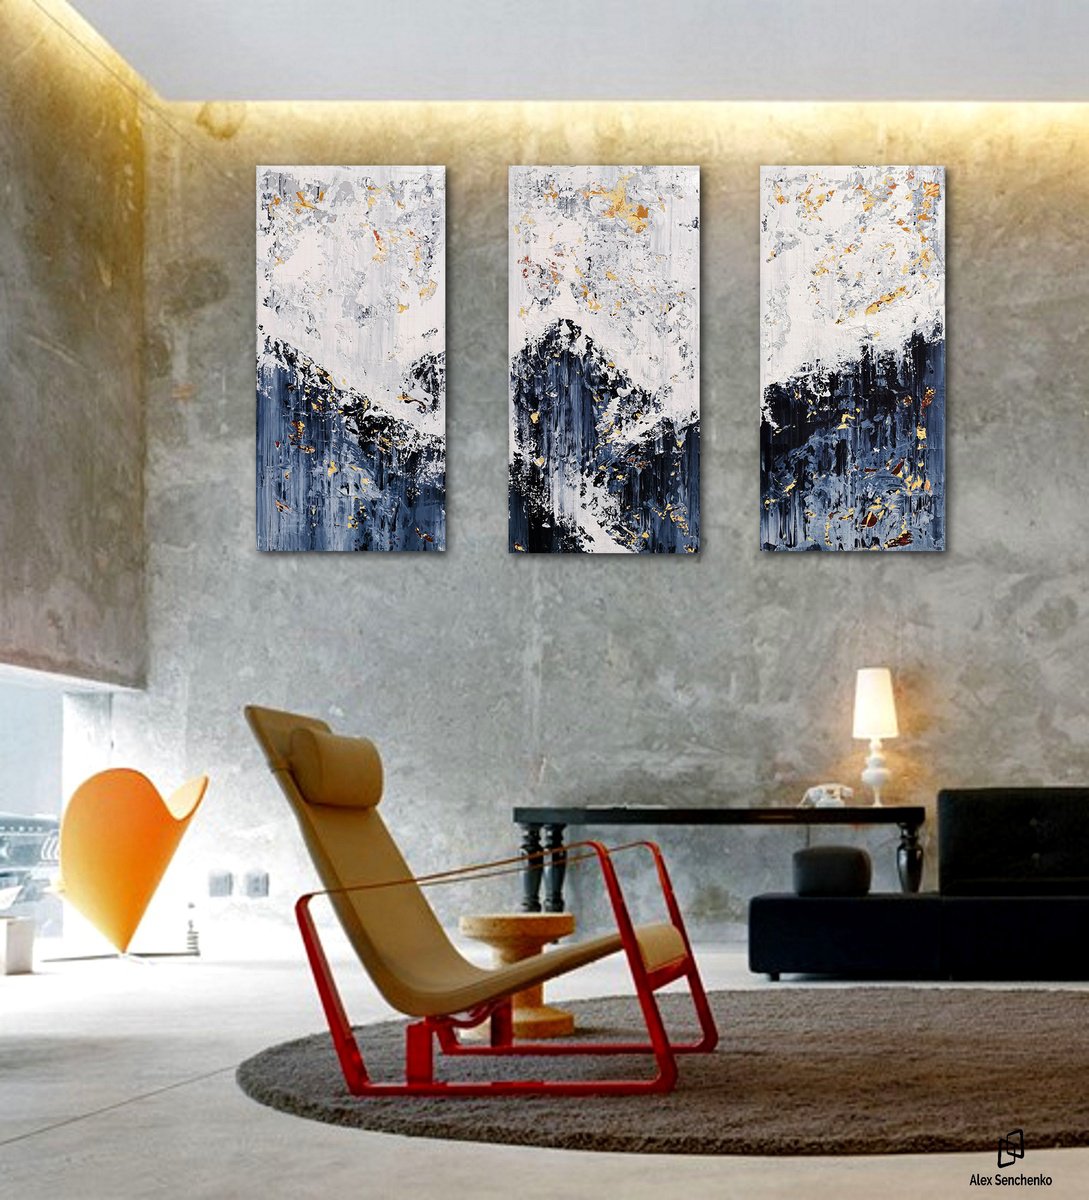 150x100cm. / Abstract triptych / Abstract 2271 by Alex Senchenko